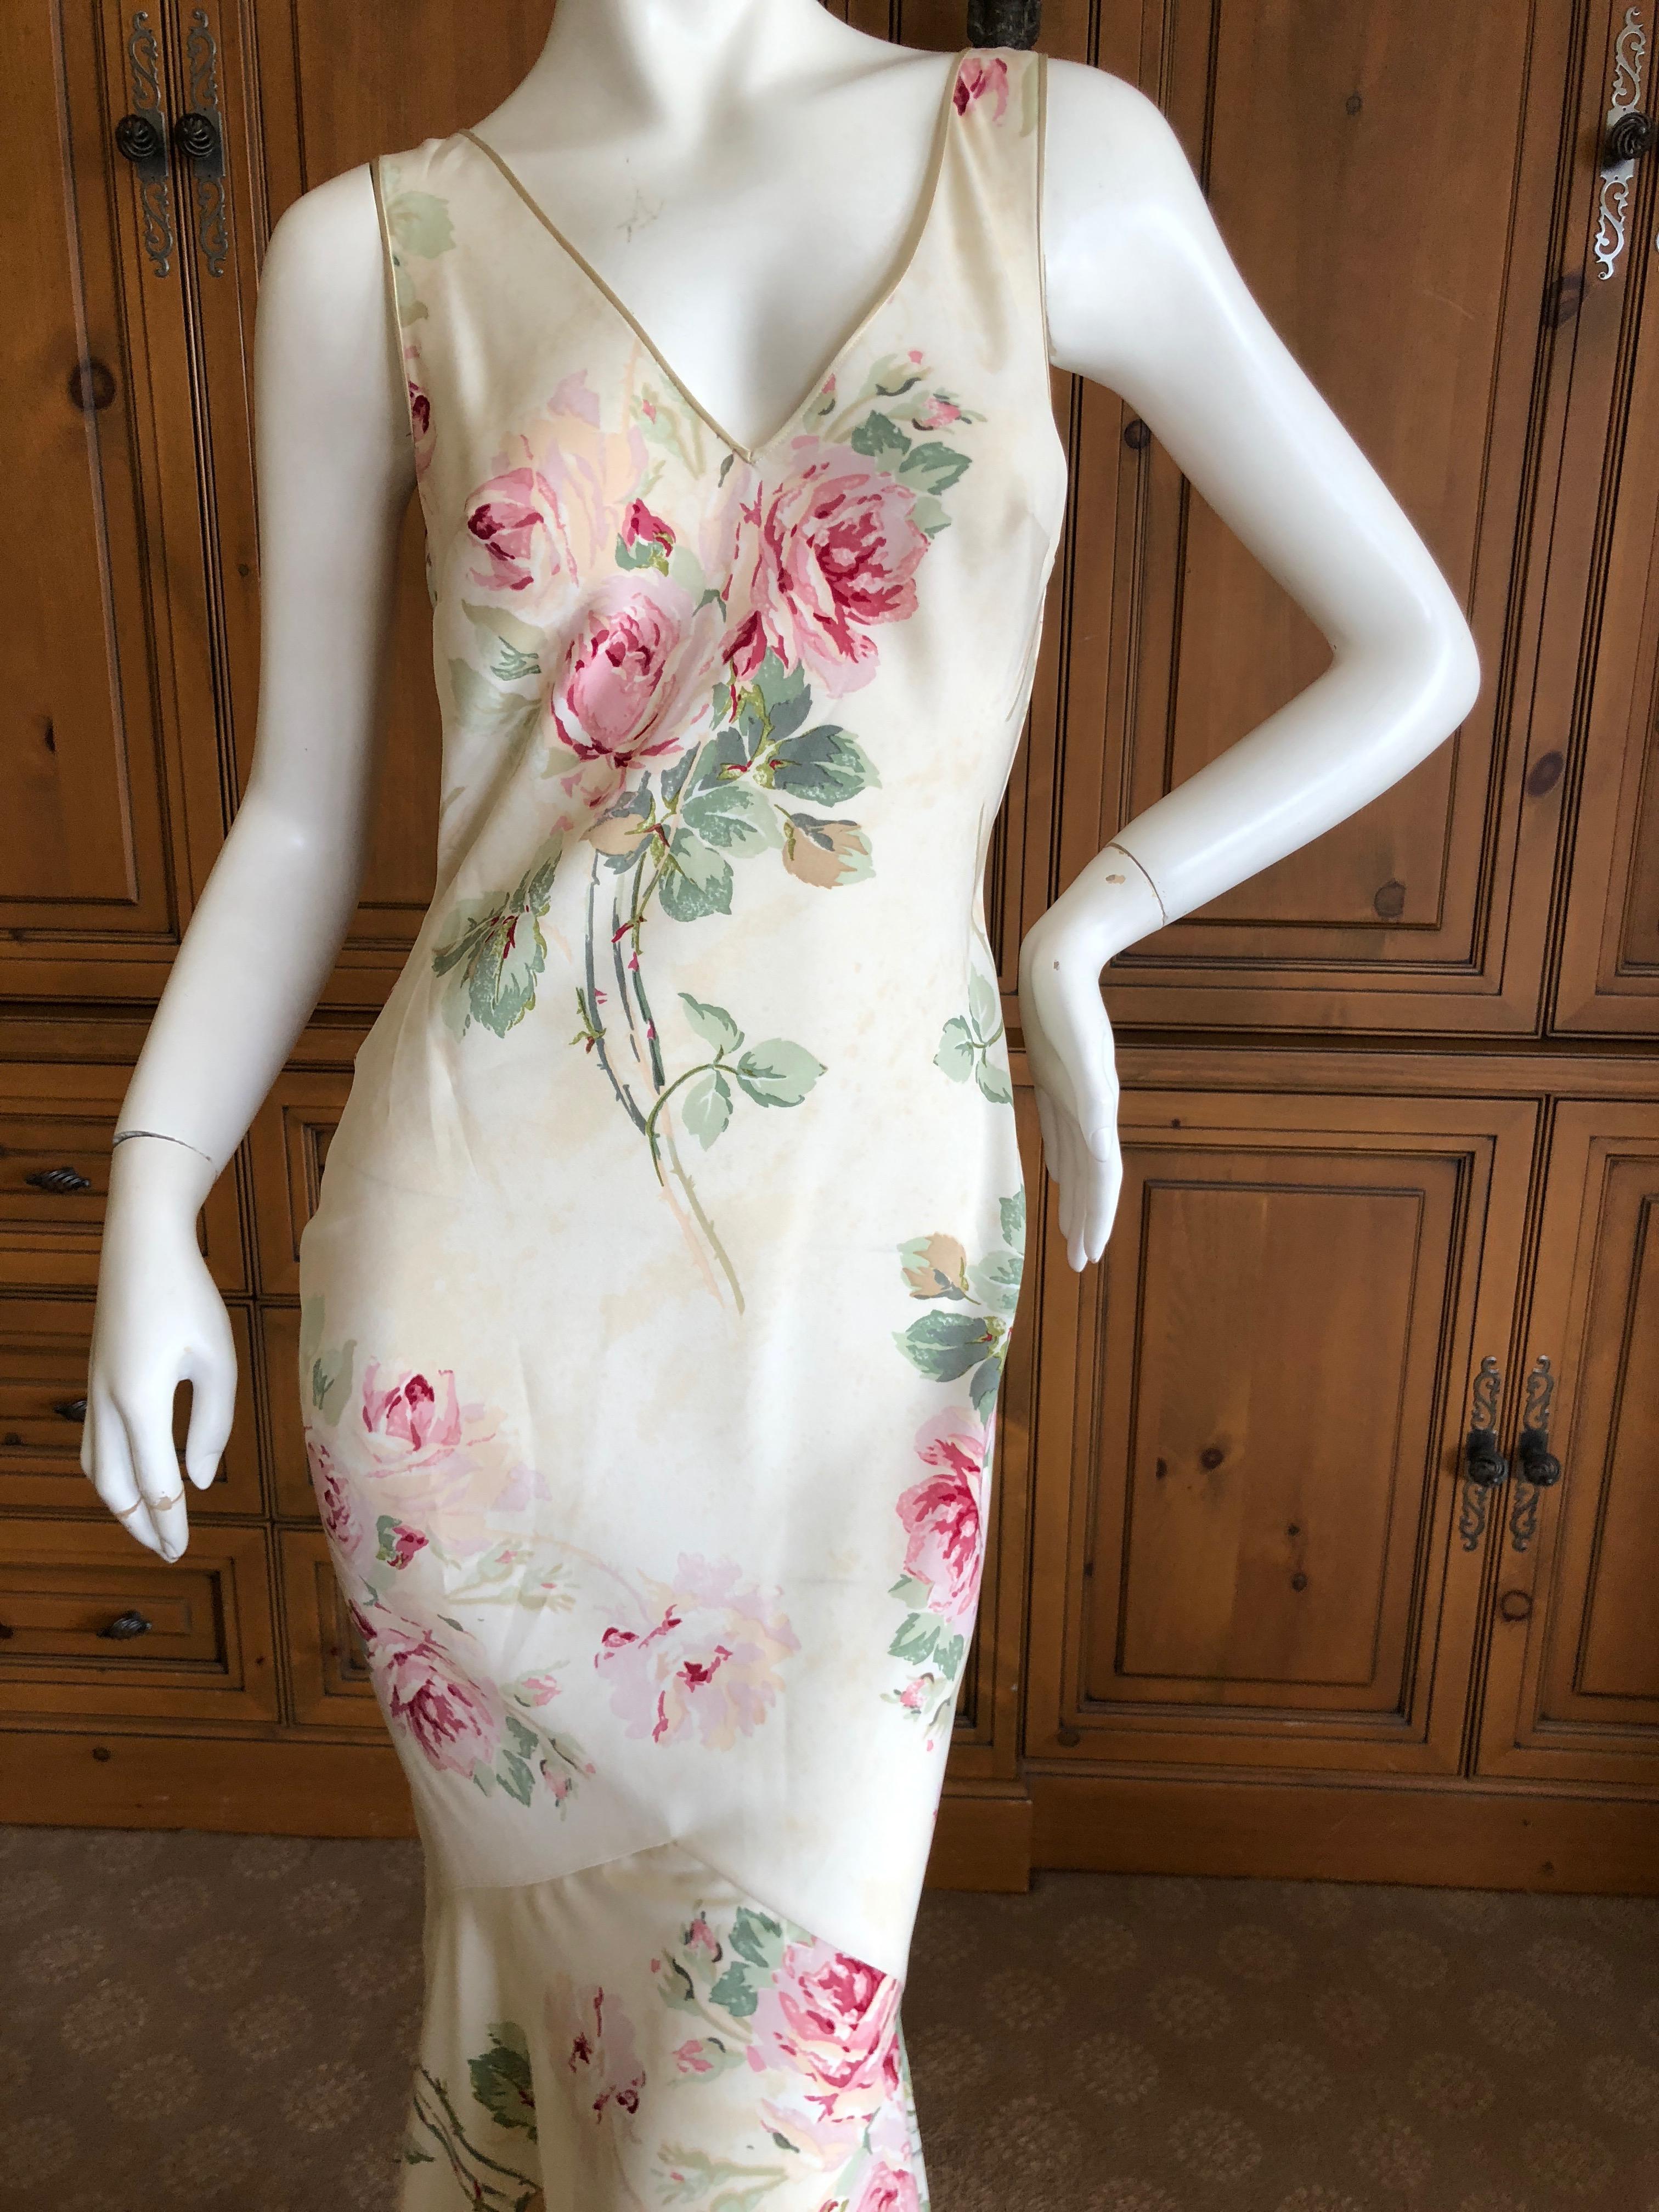 John Galliano Bias Cut Floral Dress with Draped Back and Train, 1990s  For Sale 4